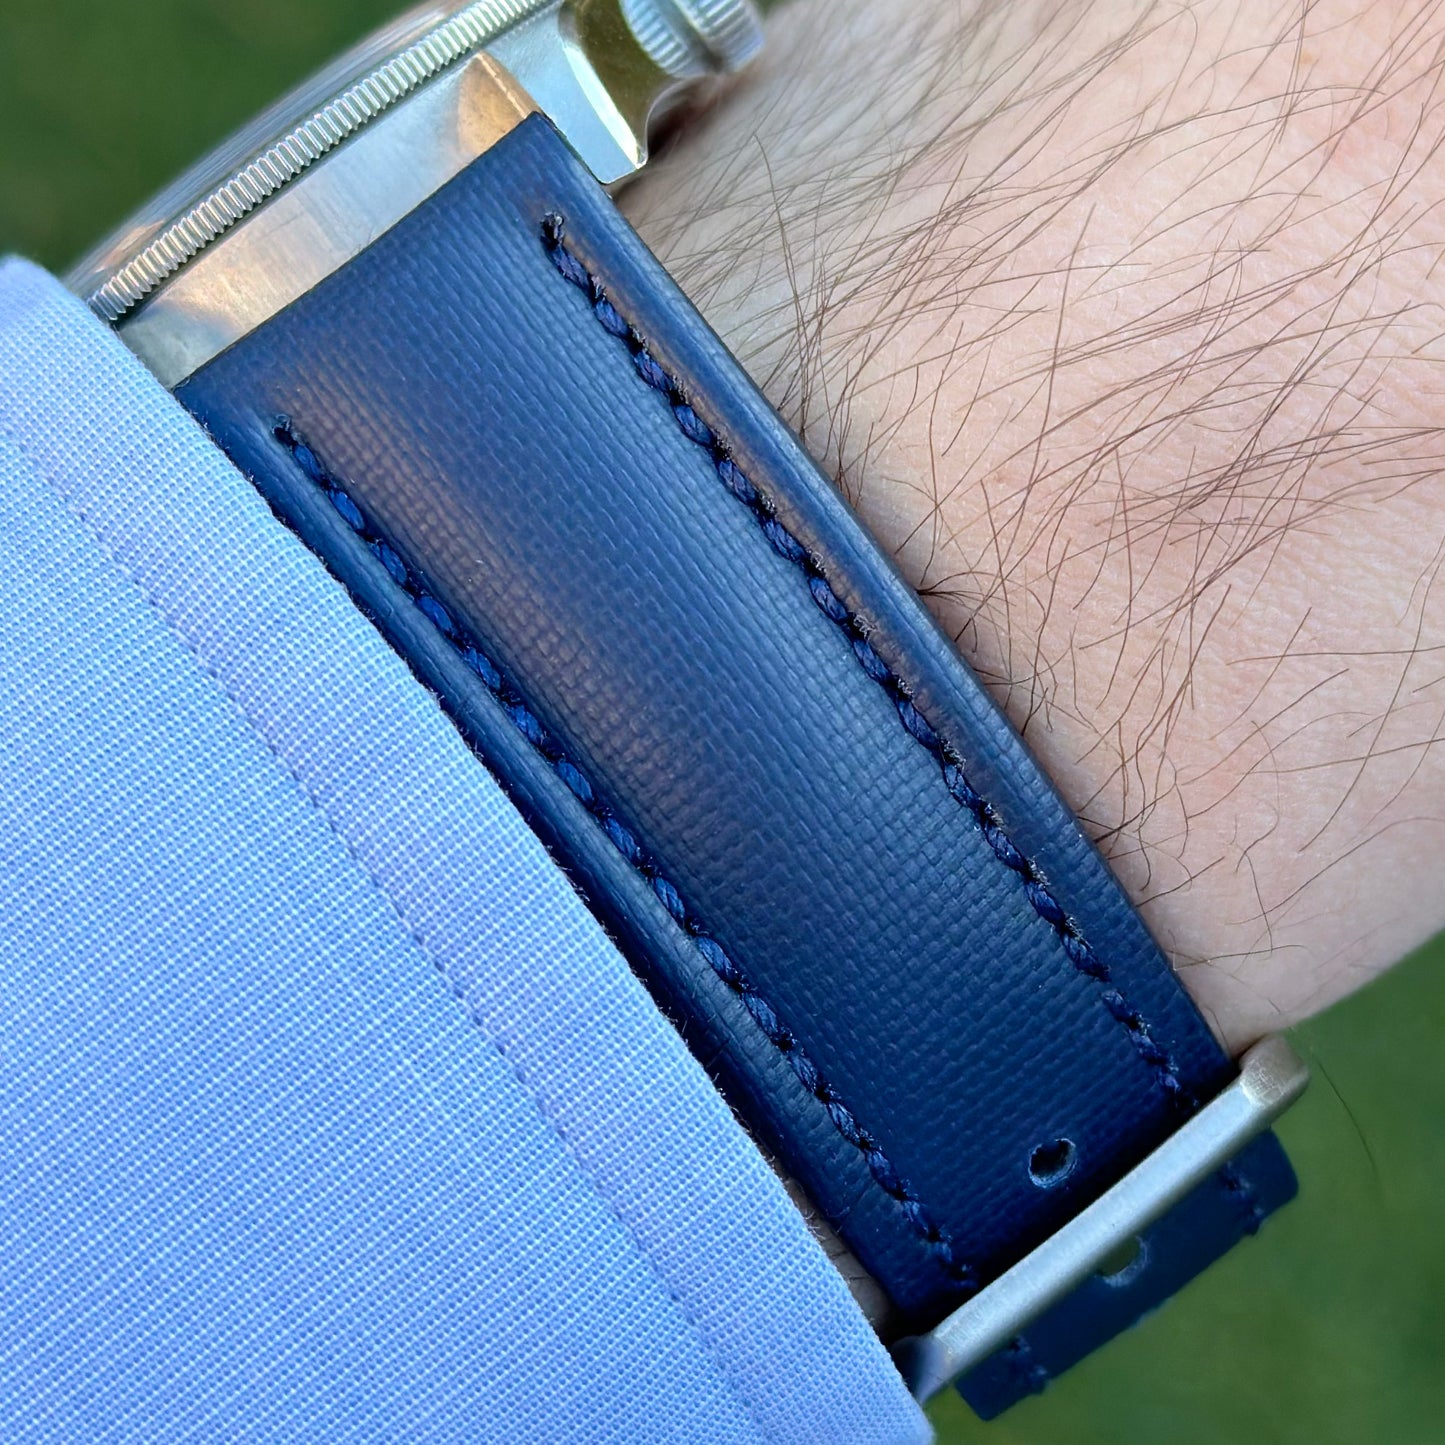 Wrist shot of the Bermuda navy blue sail cloth watch strap on the Tudor Blackbay 58. Padded strap. Watch And Strap